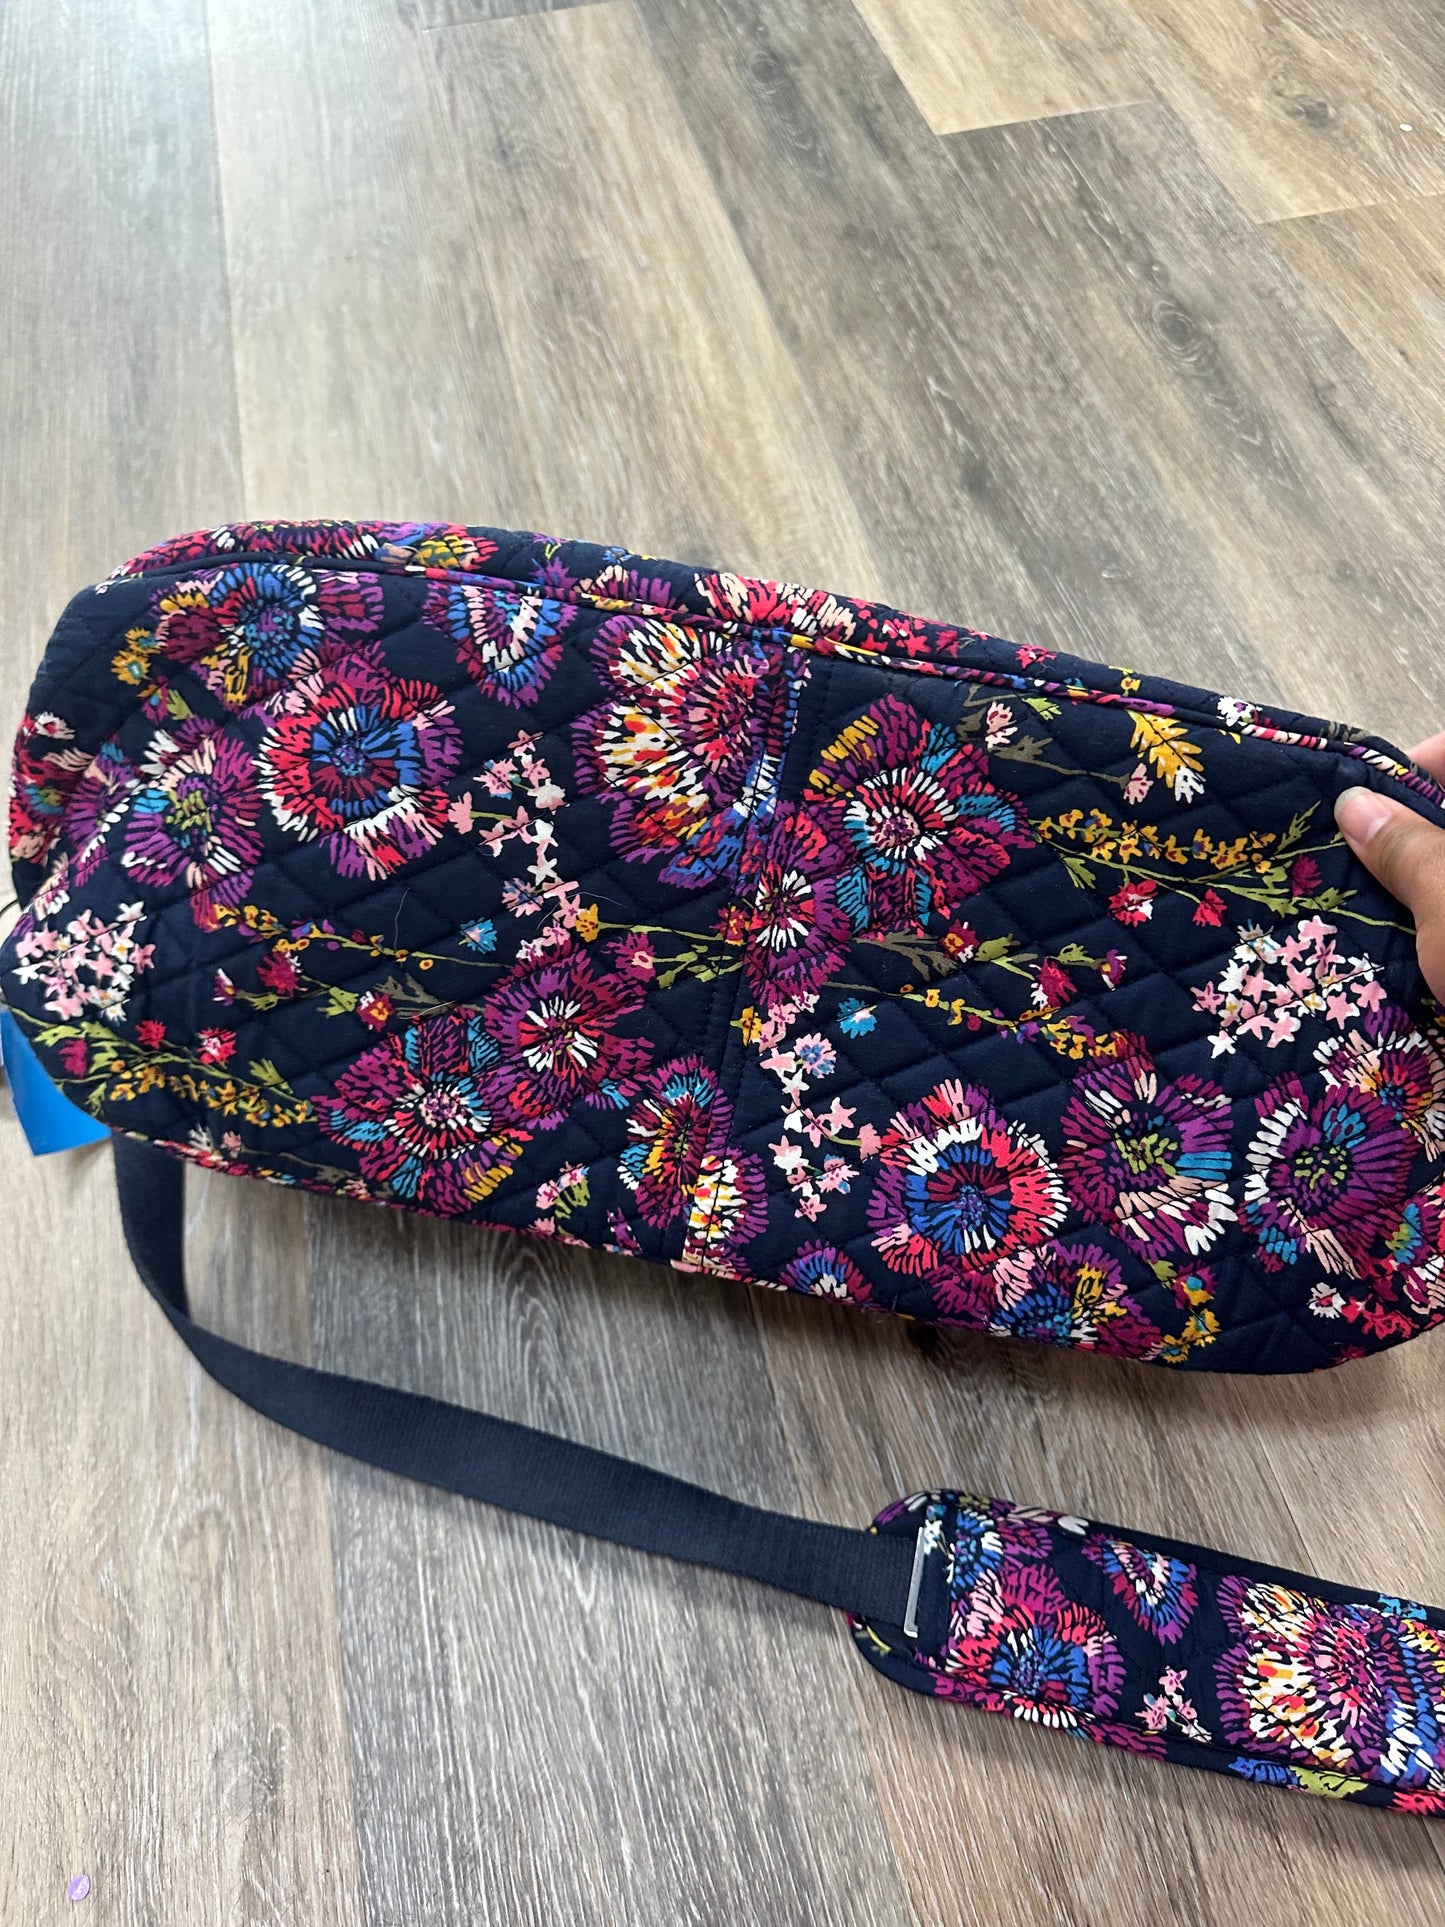 Duffle And Weekender Vera Bradley, Size Small